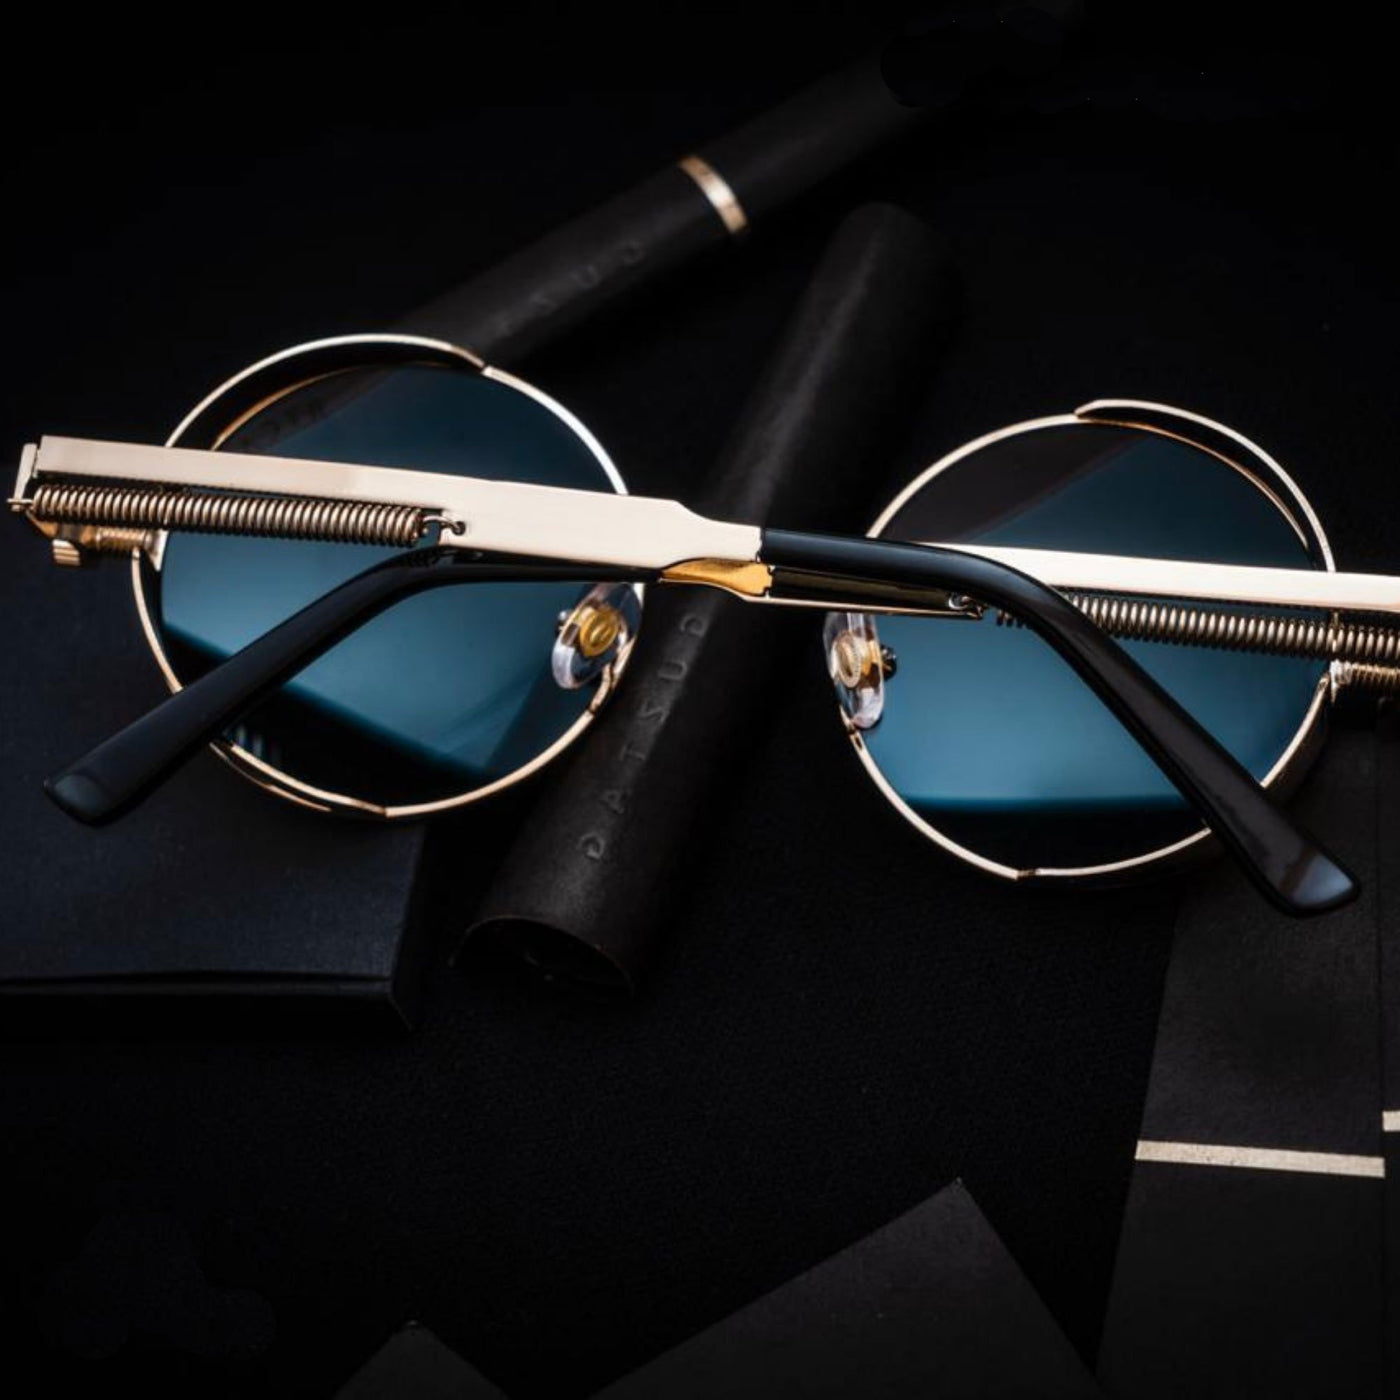 Classic Wilcox Blue Gold Eyewear For Men And Women-Unique and Classy